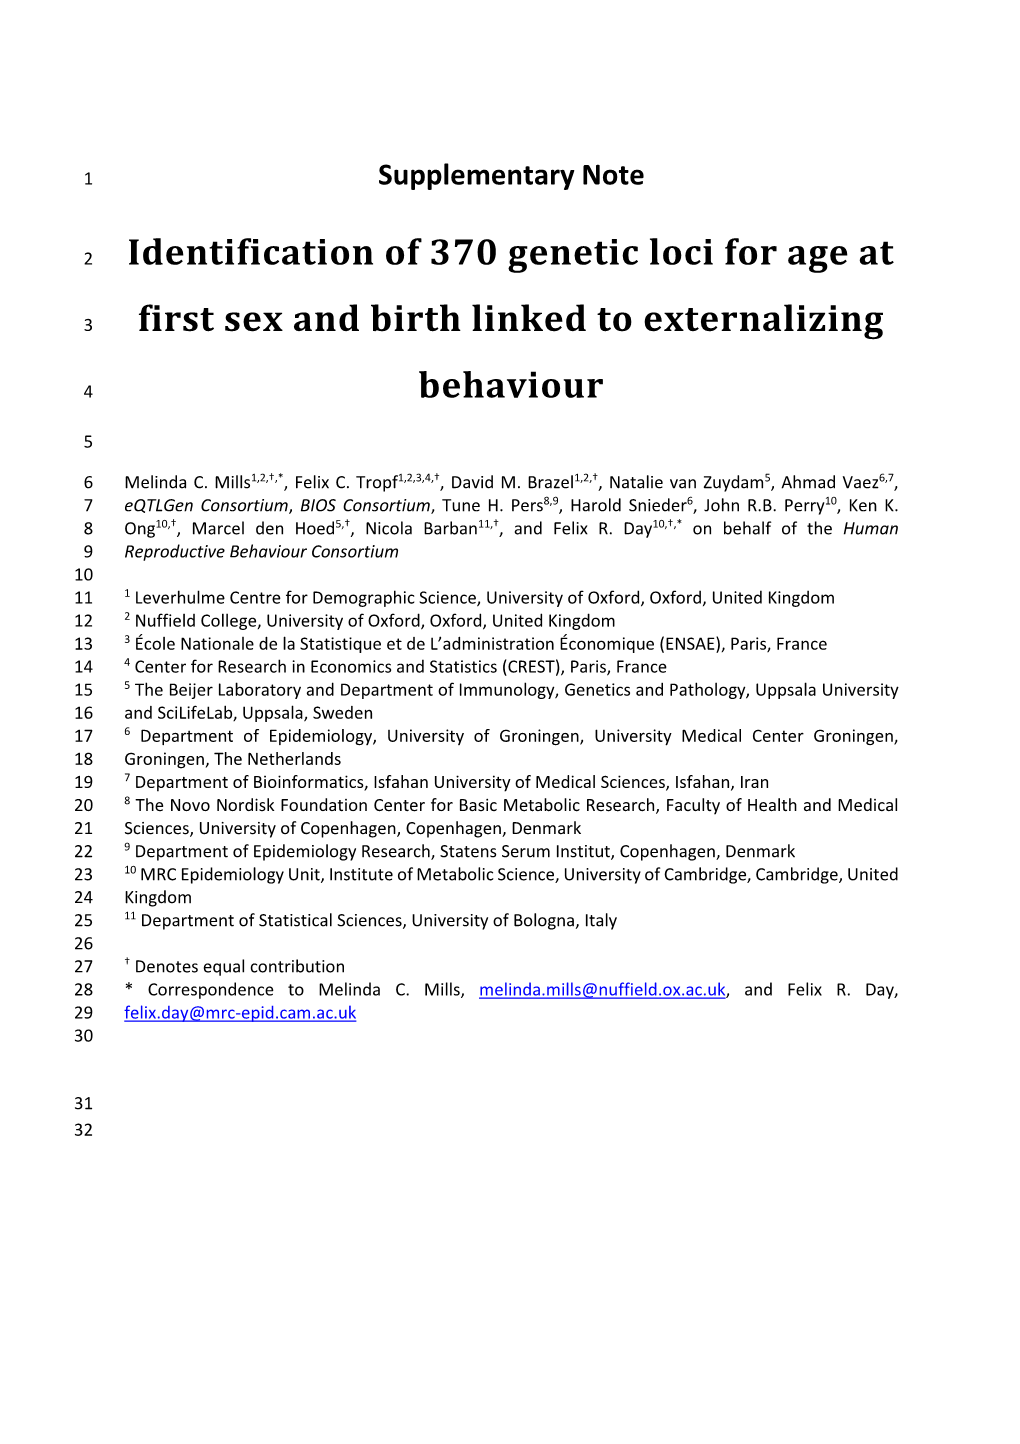 Identification of 370 Genetic Loci for Age at First Sex and Birth